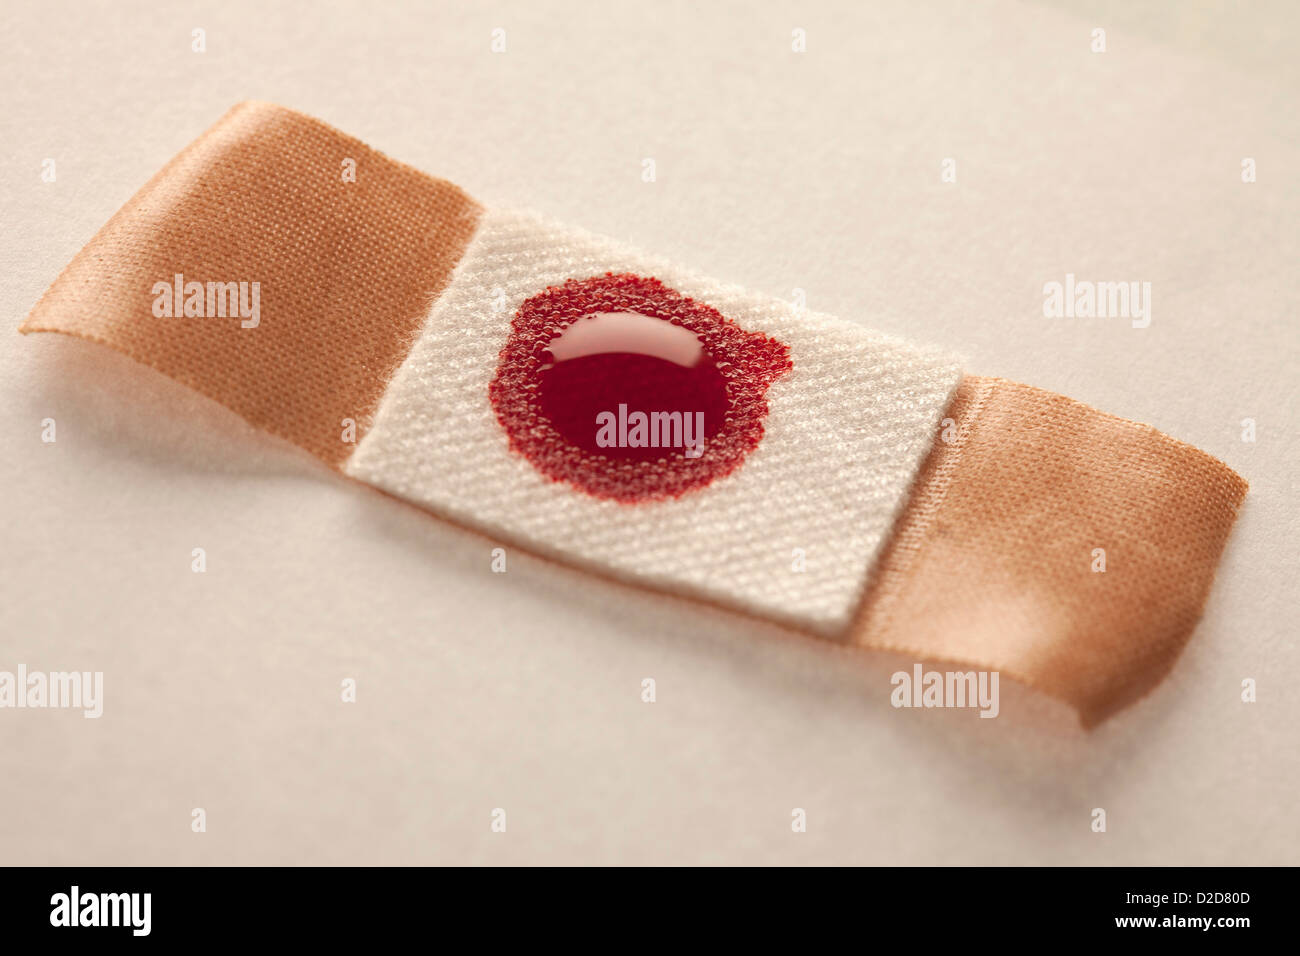 Blood stain on plaster Stock Photo